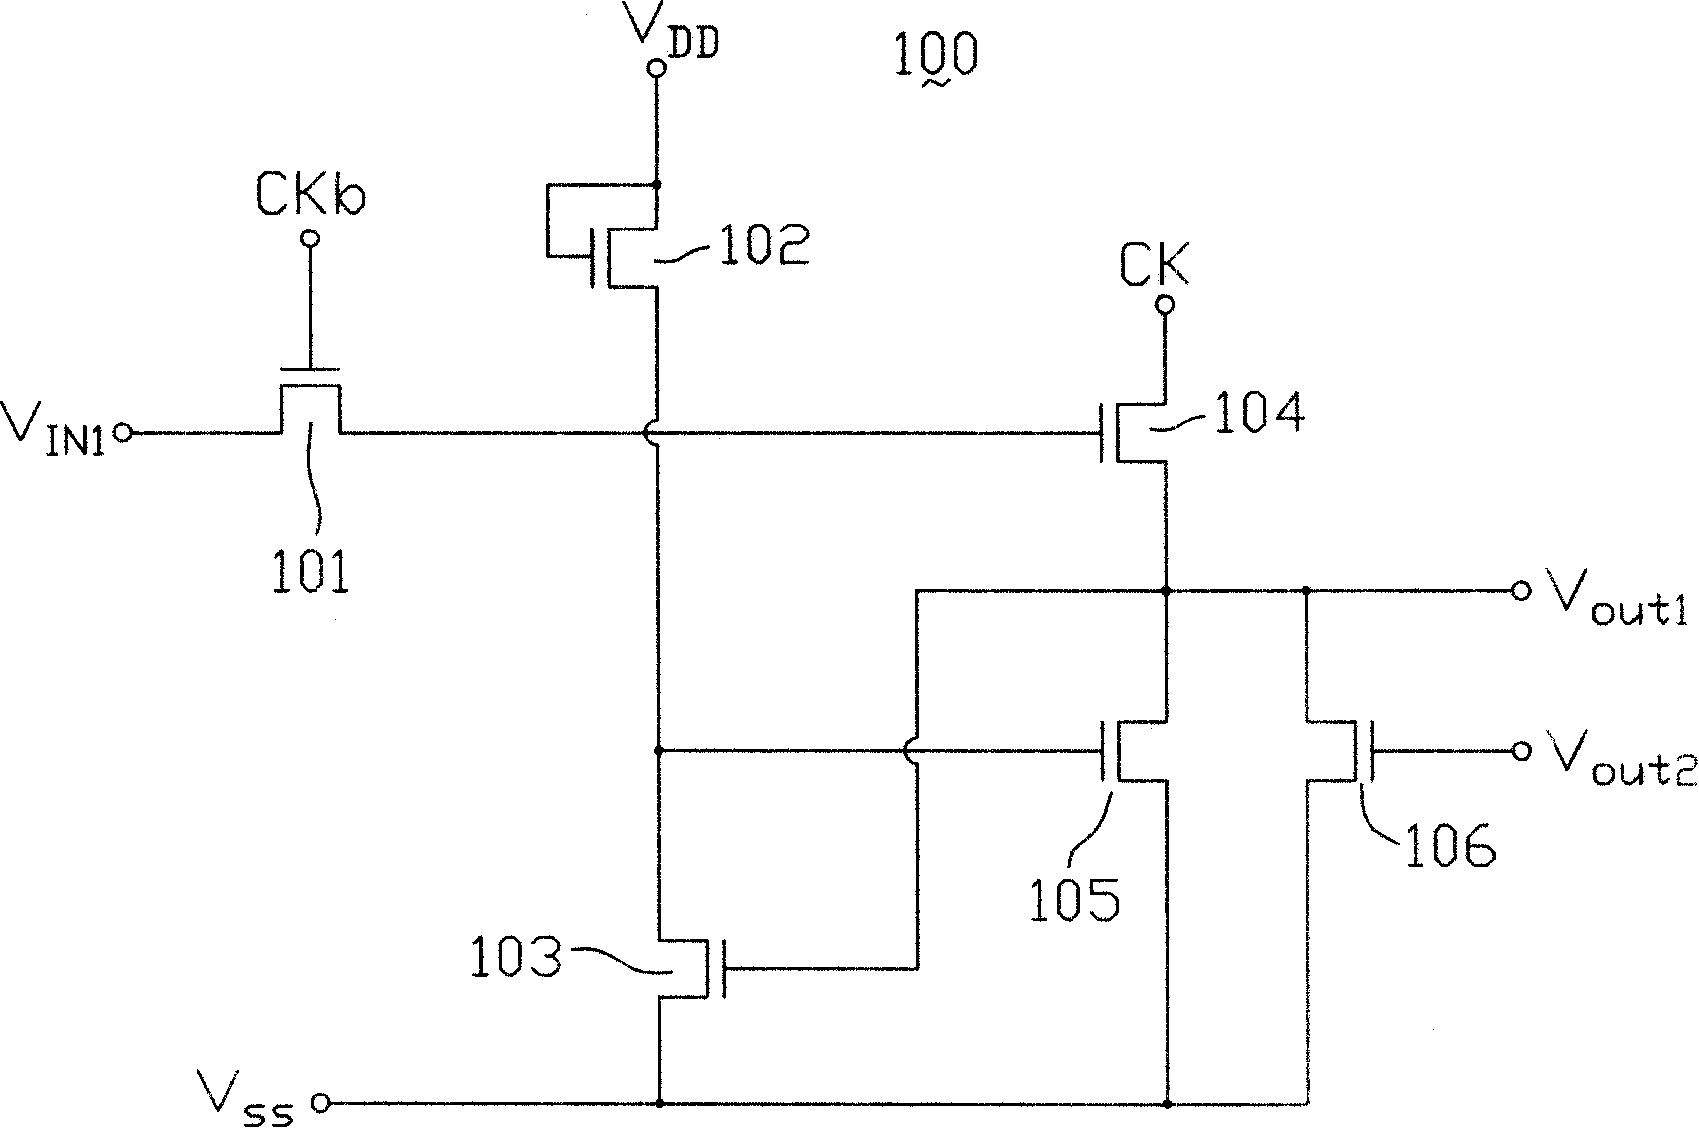 Shift registers and LCD device